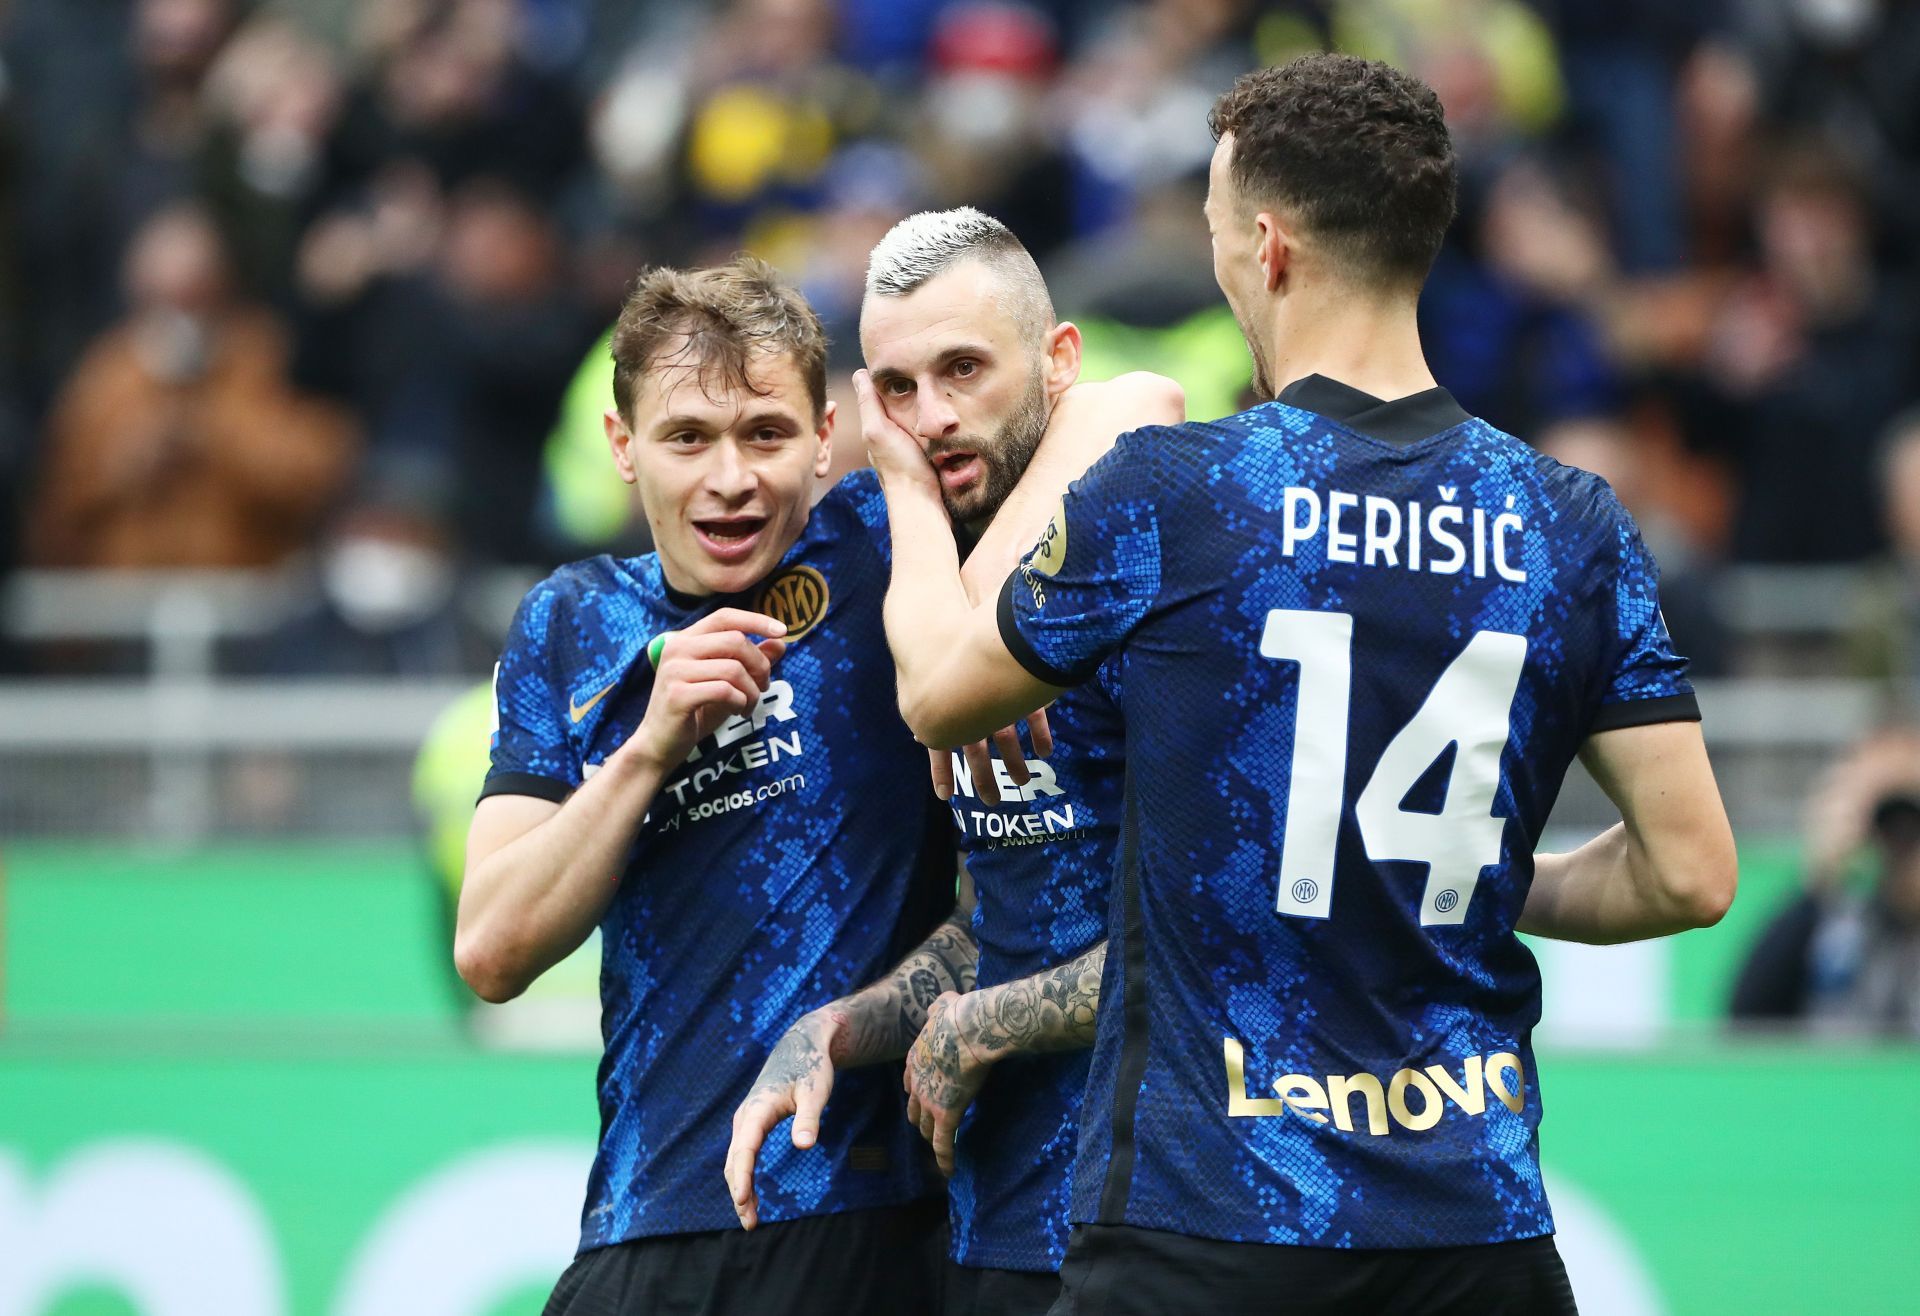 Inter Milan play Udinese on Sunday in Serie A